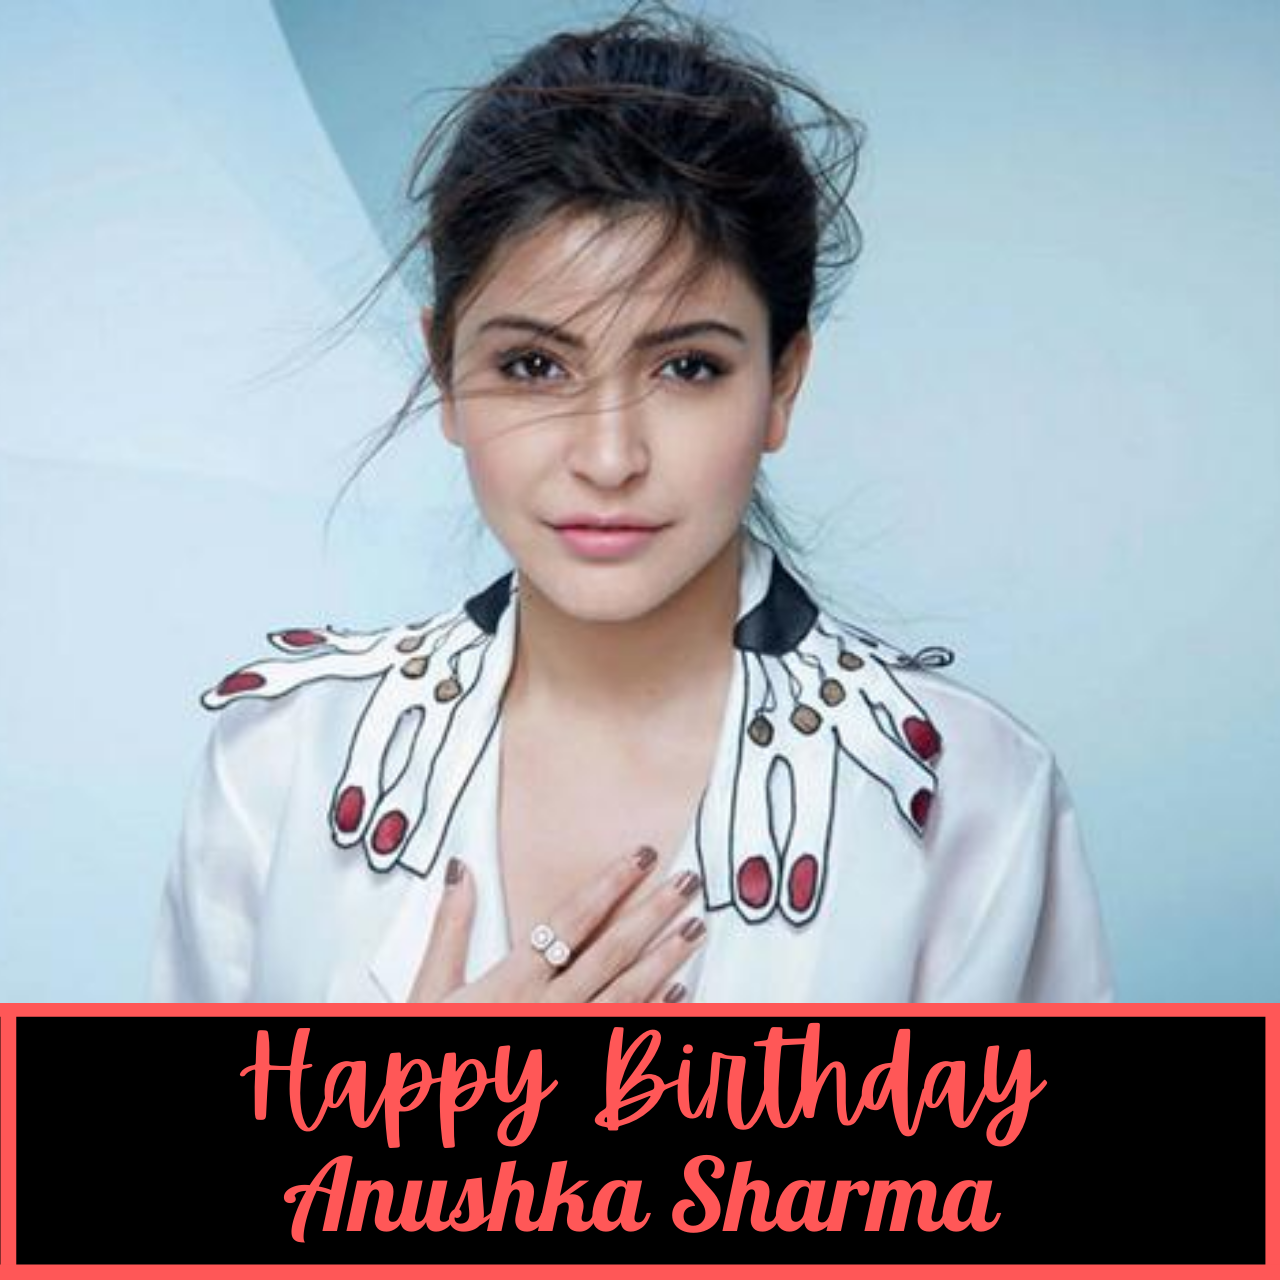 Happy Birthday Anushka Sharma: Top Wishes, Quotes, Messages, HD Images, Greetings To Greet "Mimi"